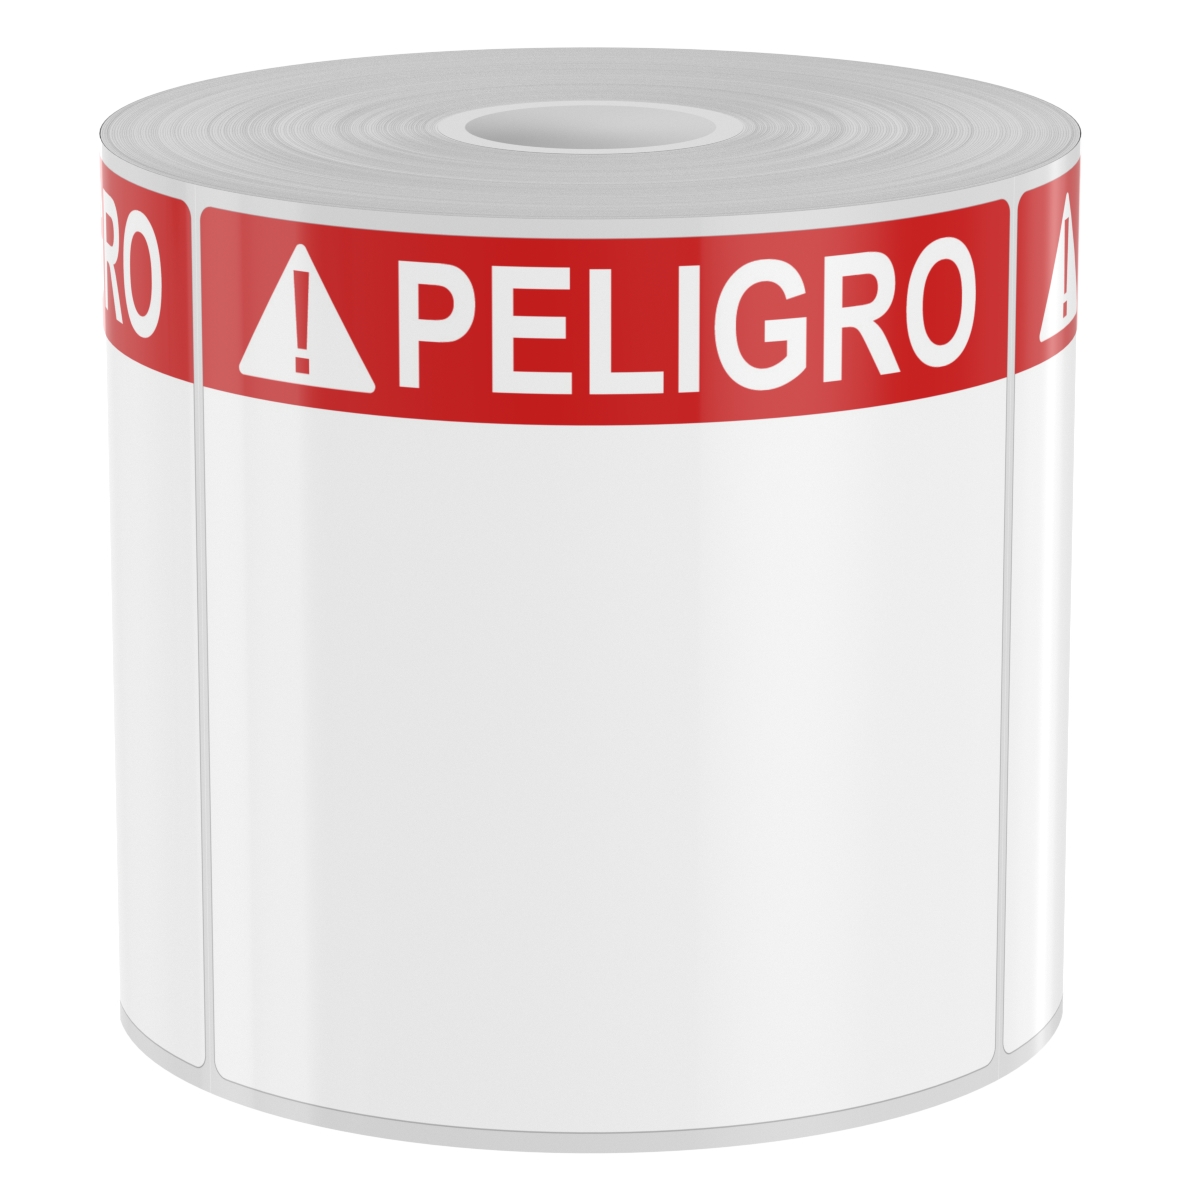 Ask a question about 250 4" x 4" High-Performance Die-Cut Red with White Peligro Header